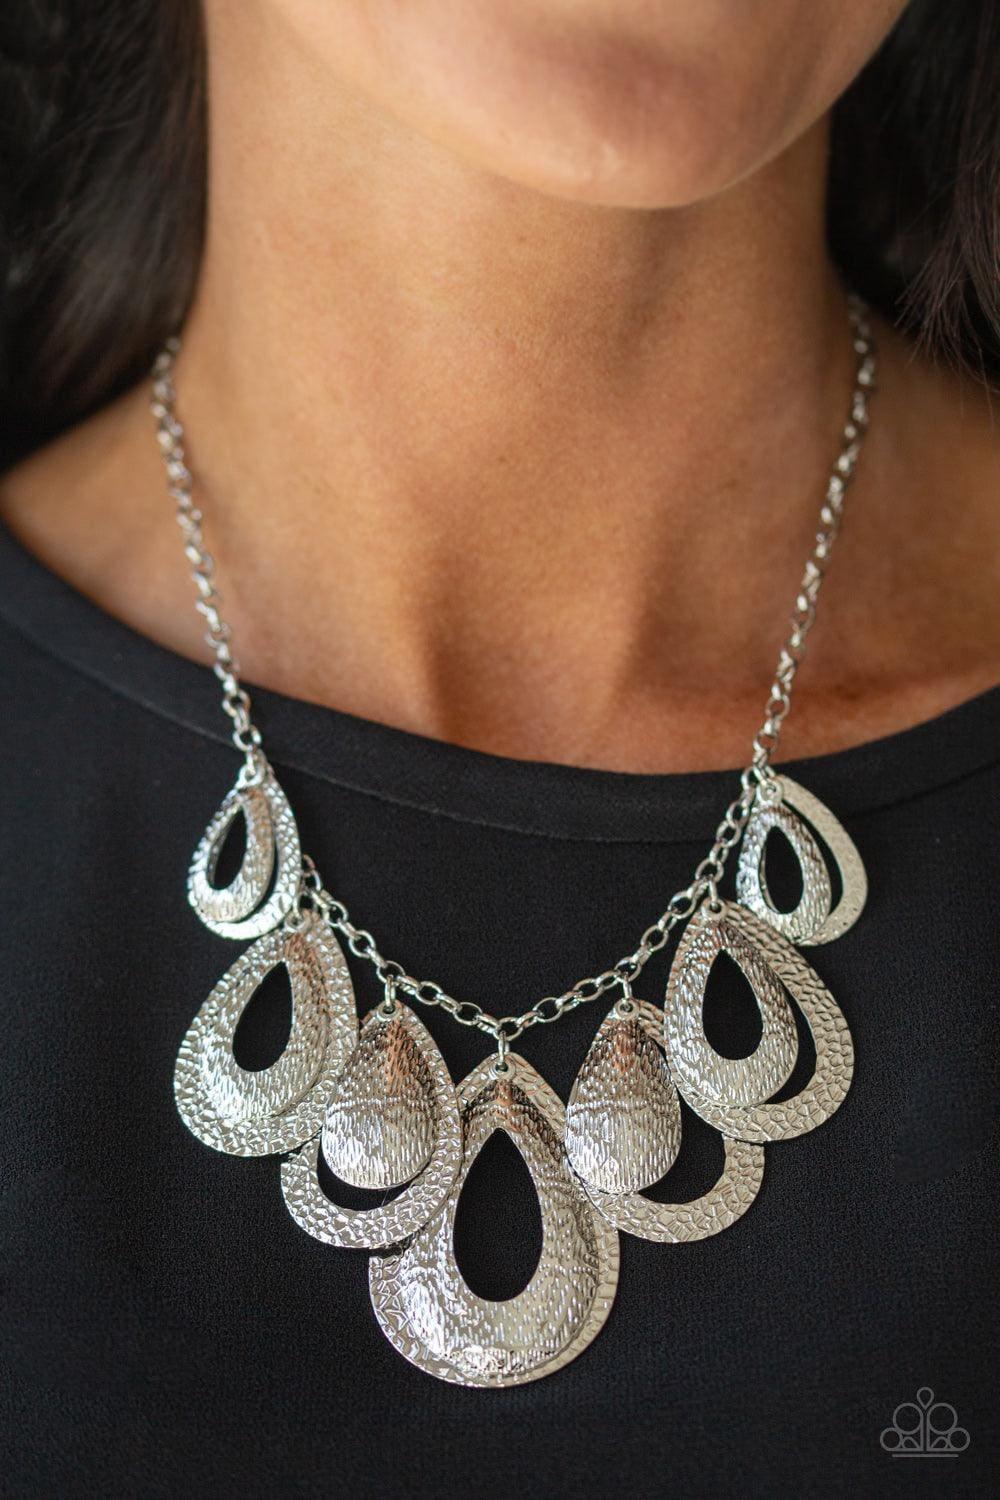 Paparazzi Accessories - Teardrop Tempest - Silver Necklace - Bling by JessieK